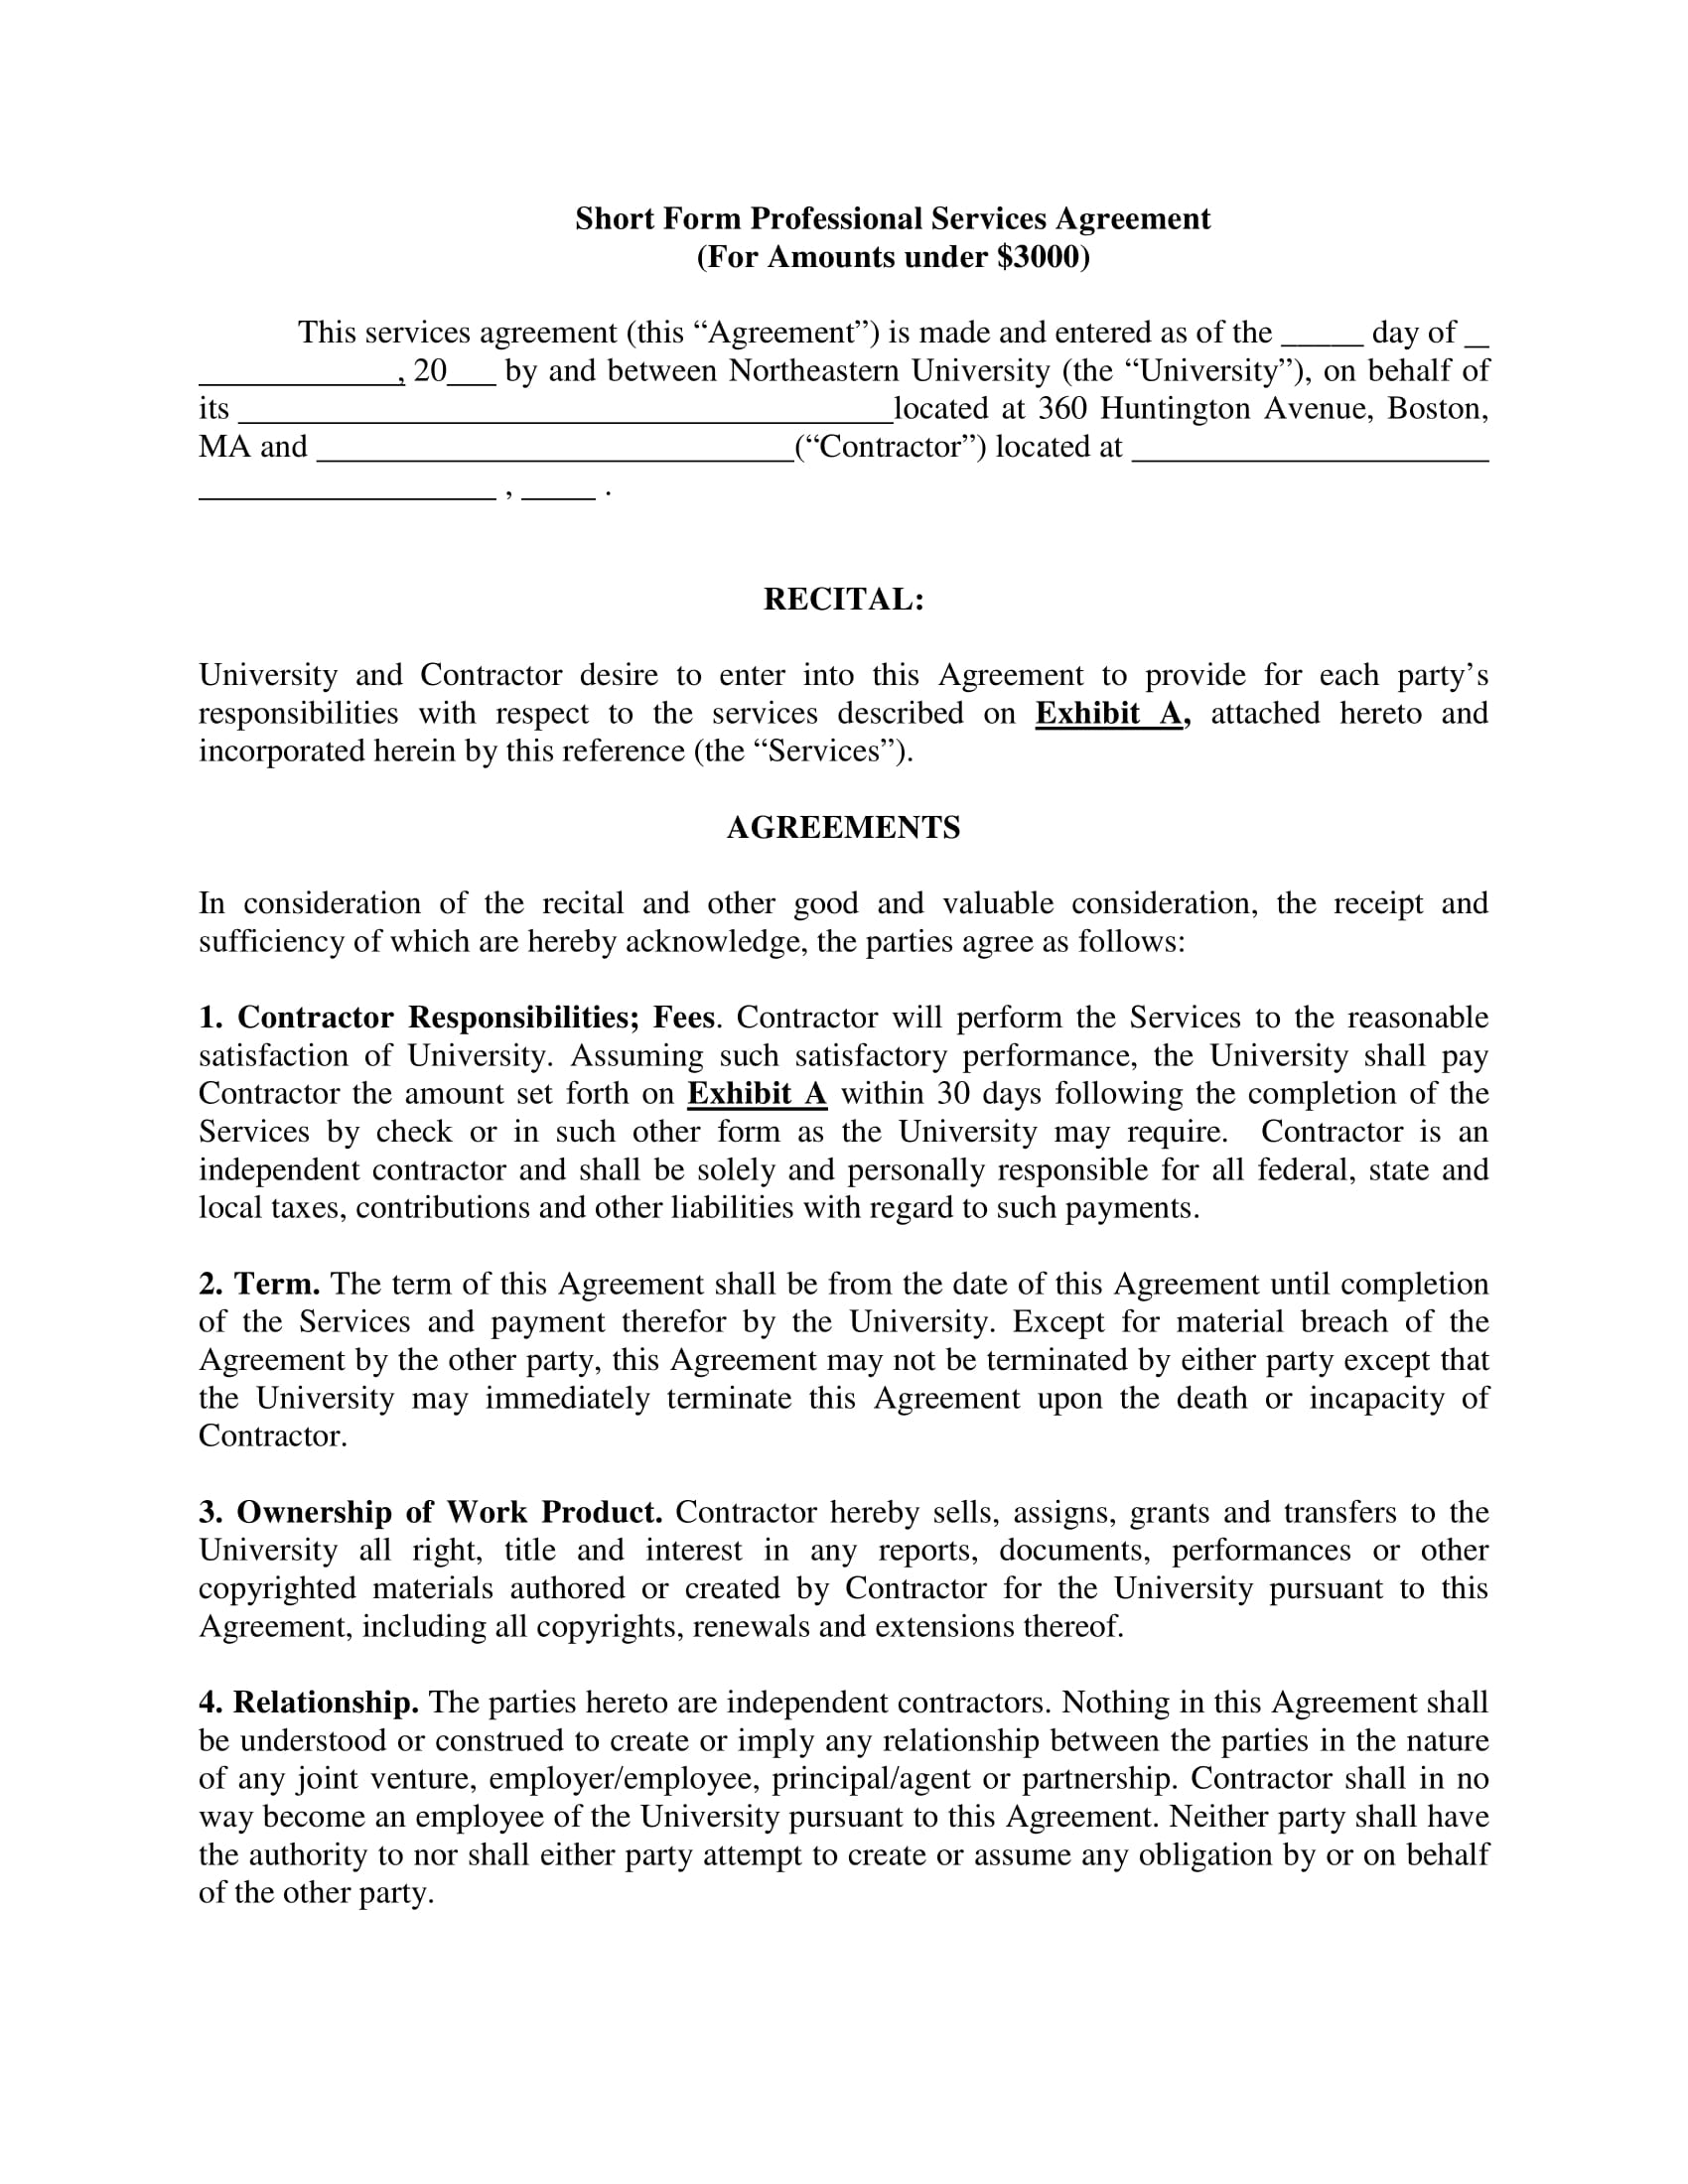 Short Form Professional Services Agreement Contract Template Example 1